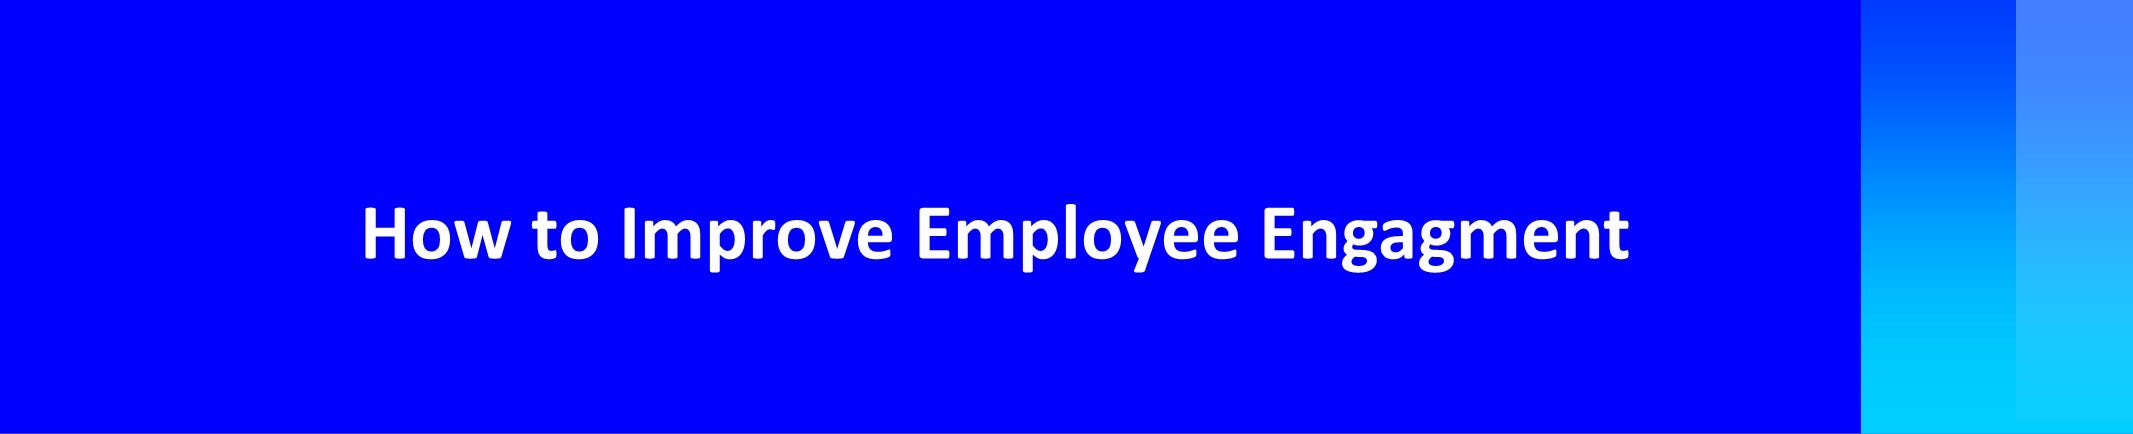 Header for chart on how to improve employee engagement